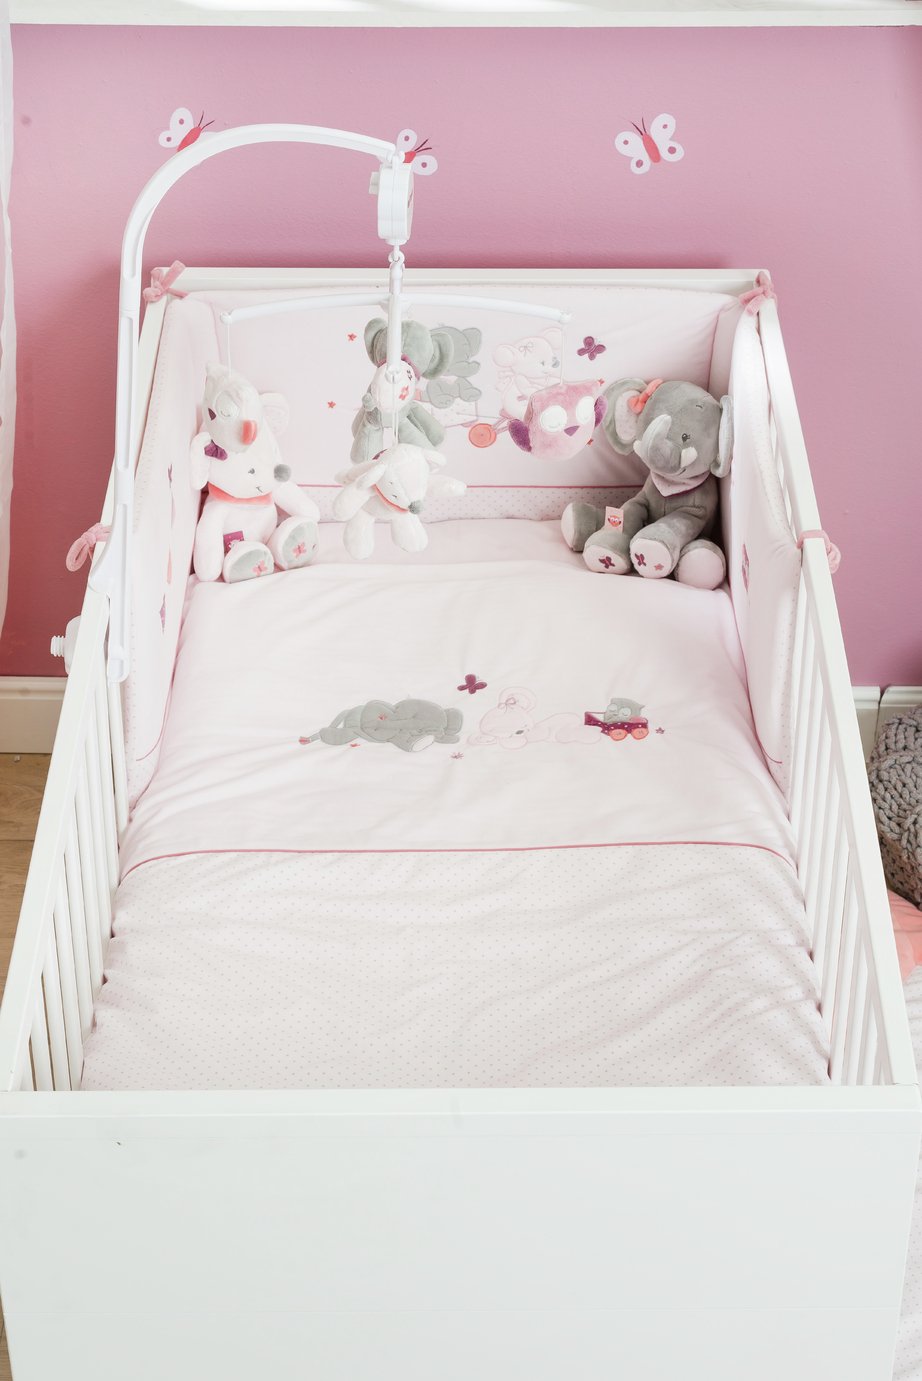 Nattou Adele and Valentine Cot Mobile Review